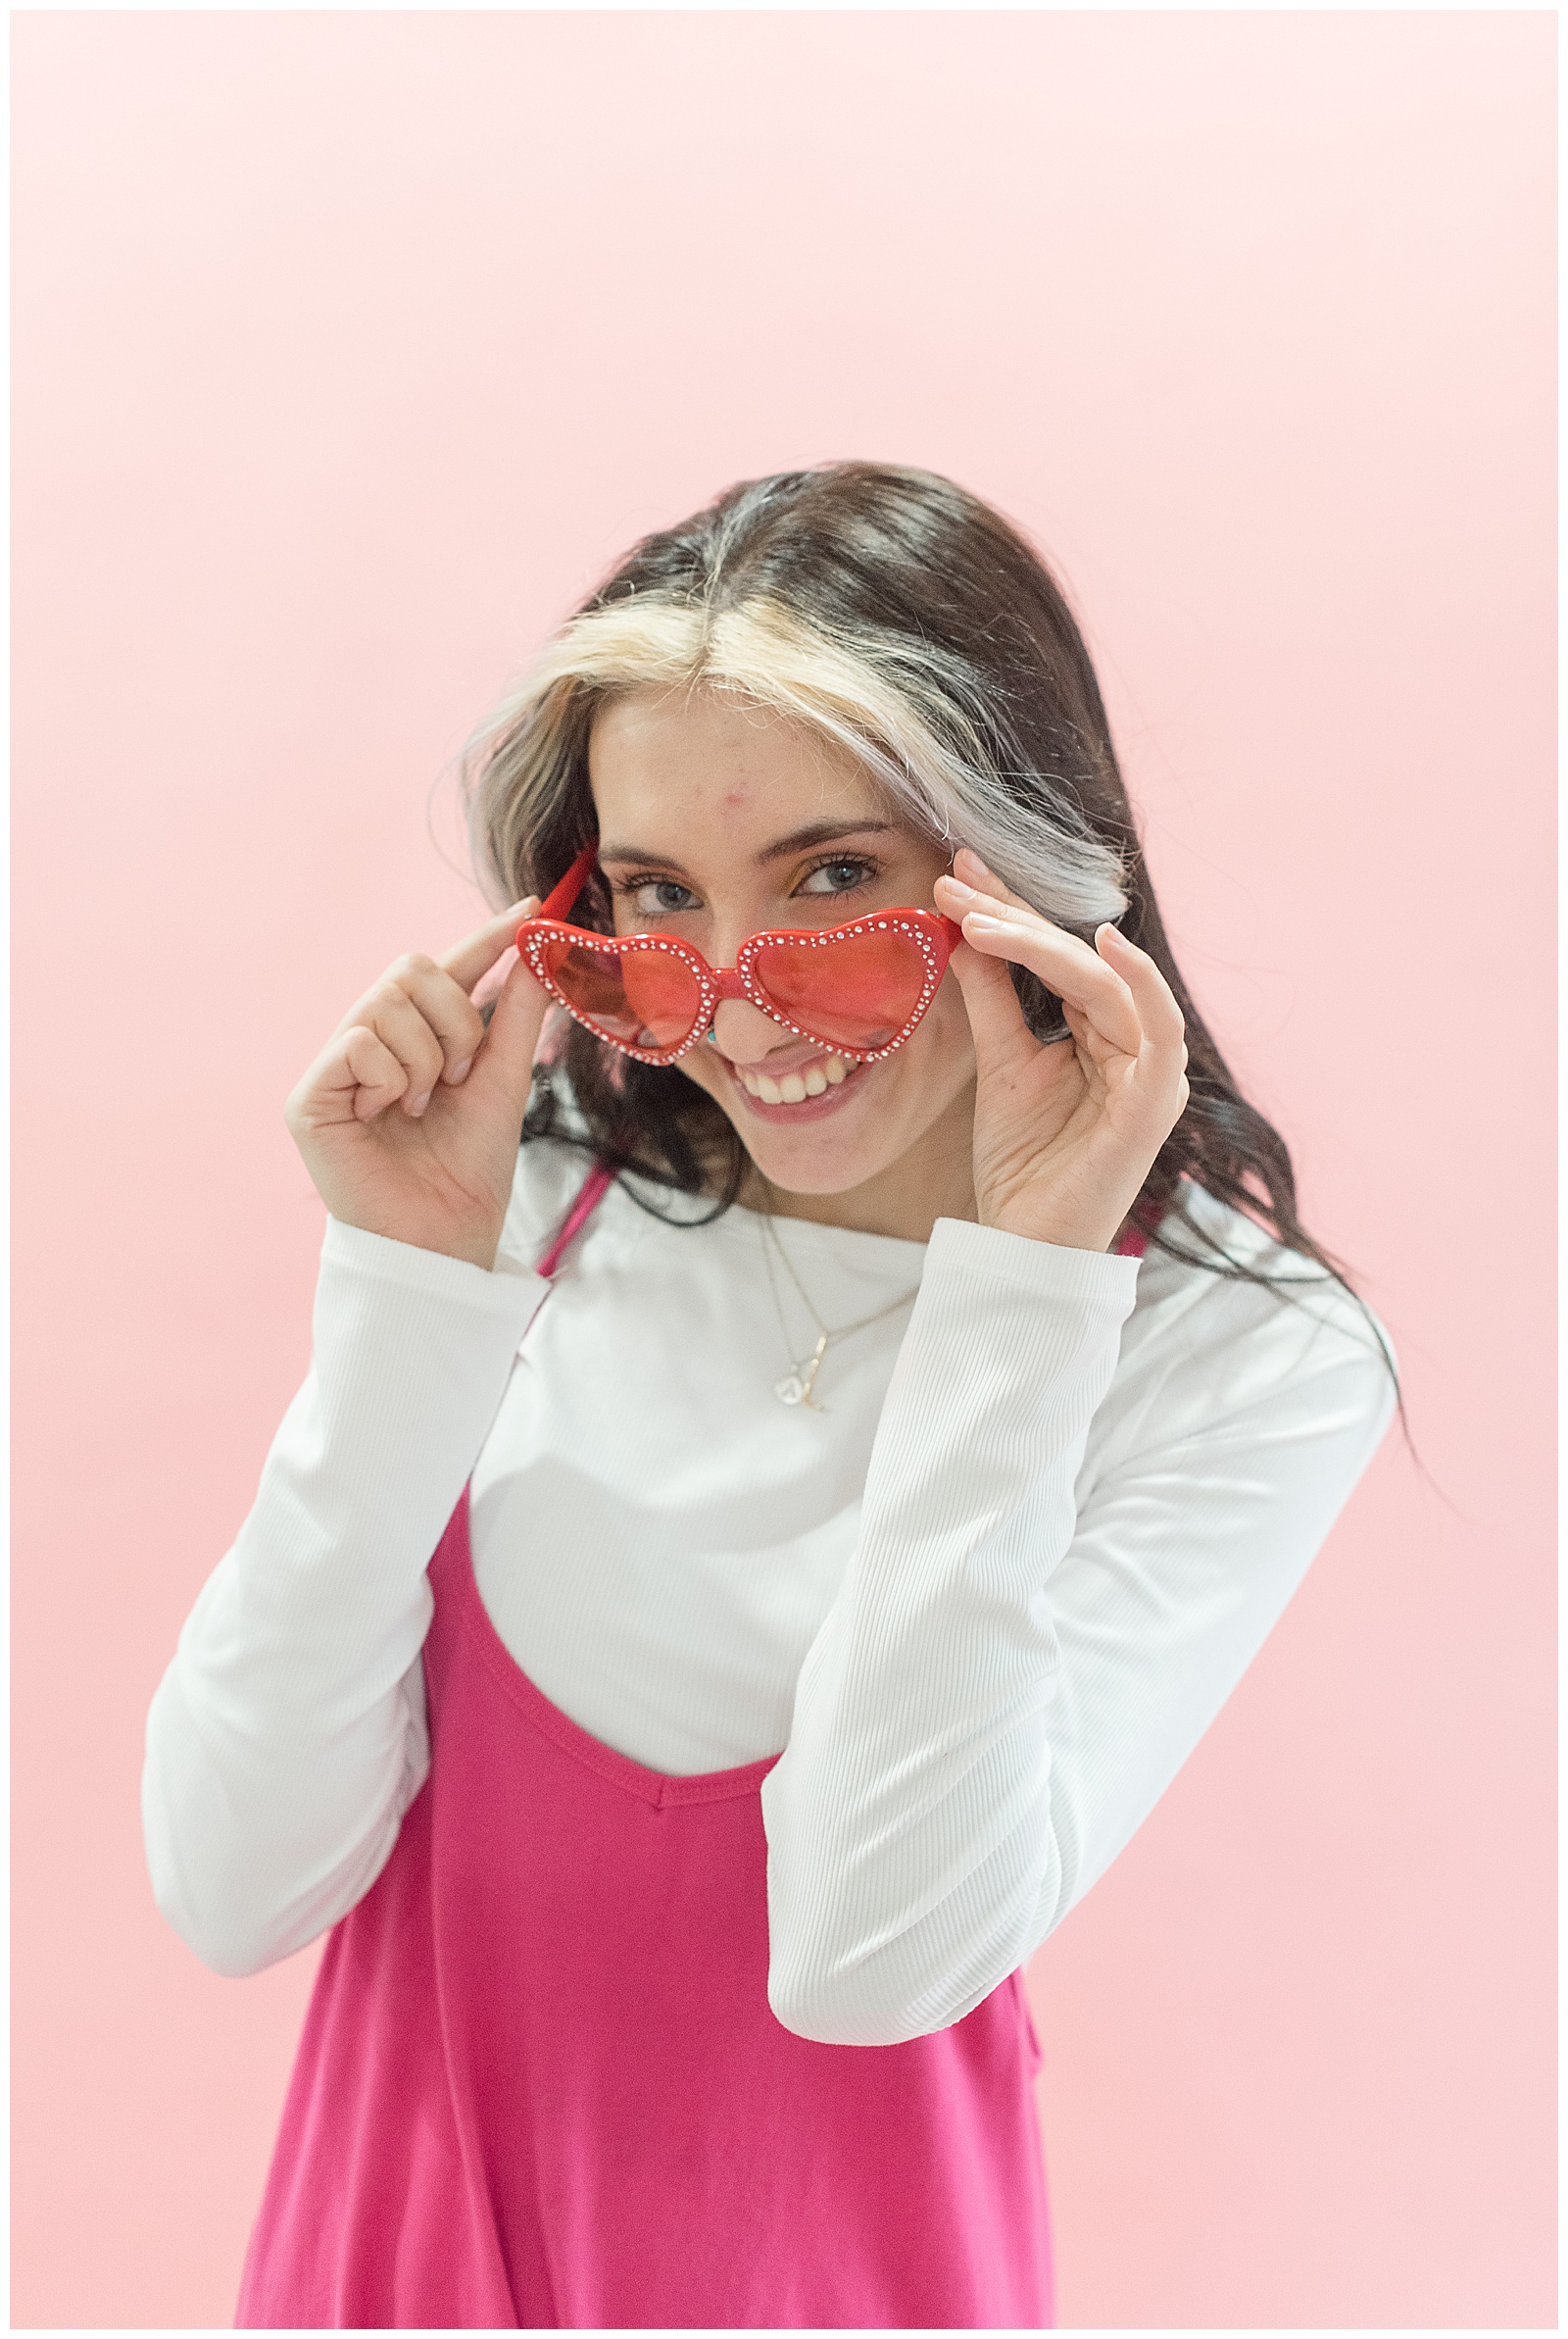 senior girl peeking out over the top of her red heart-shaped glasses and smiling at haven studios in millersville pa